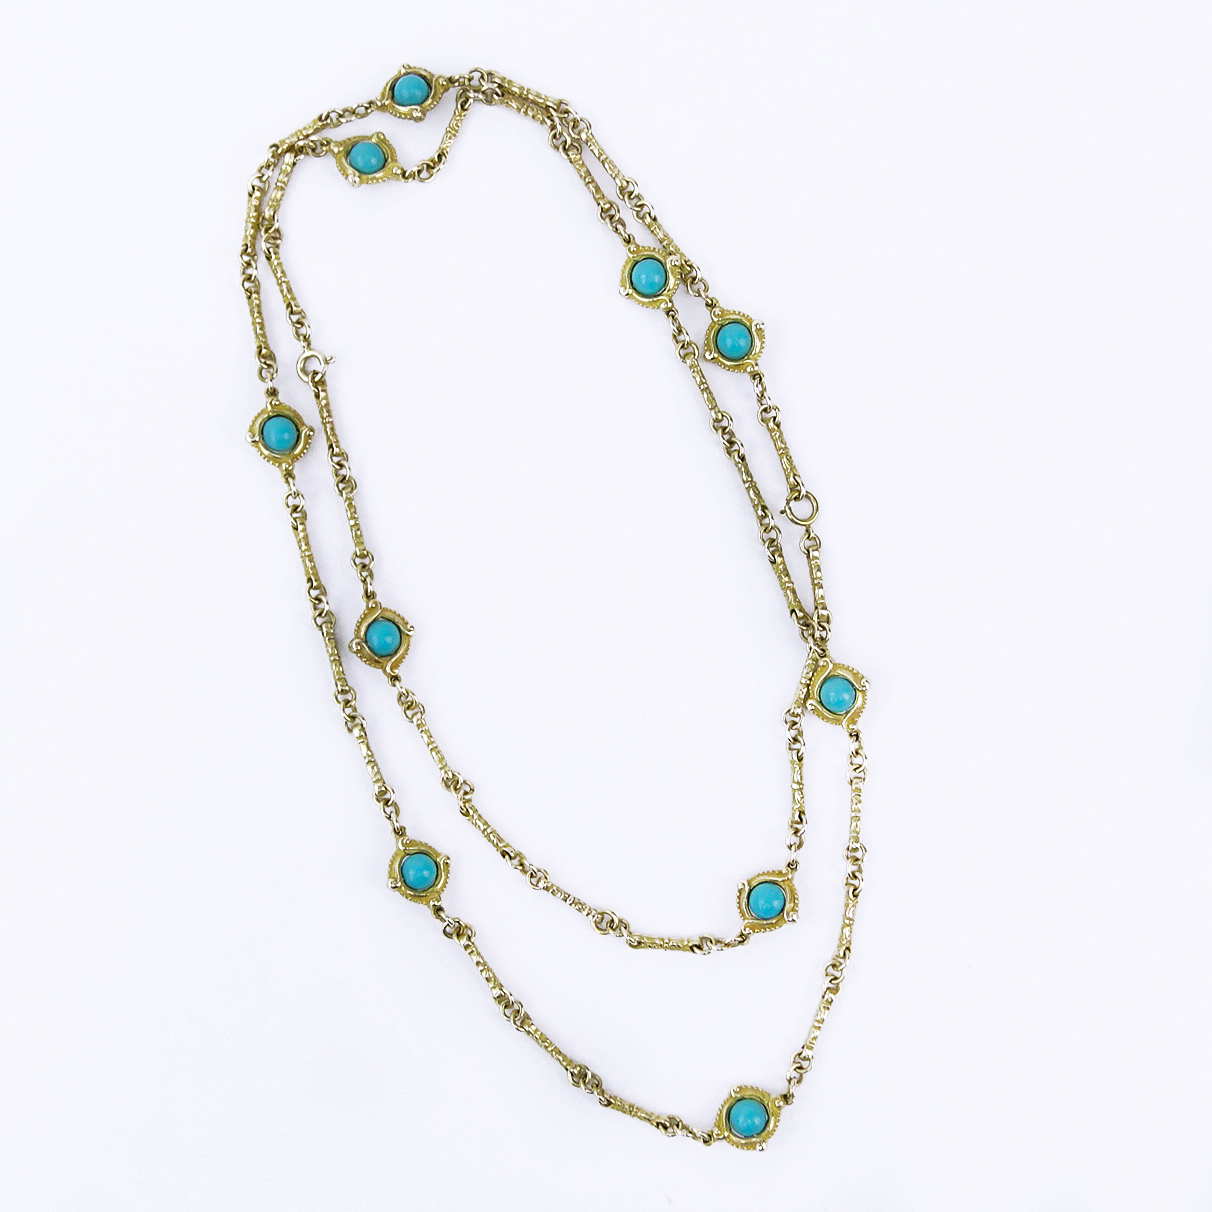 Vintage 14 Karat Yellow Gold and Turquoise Bead Necklace